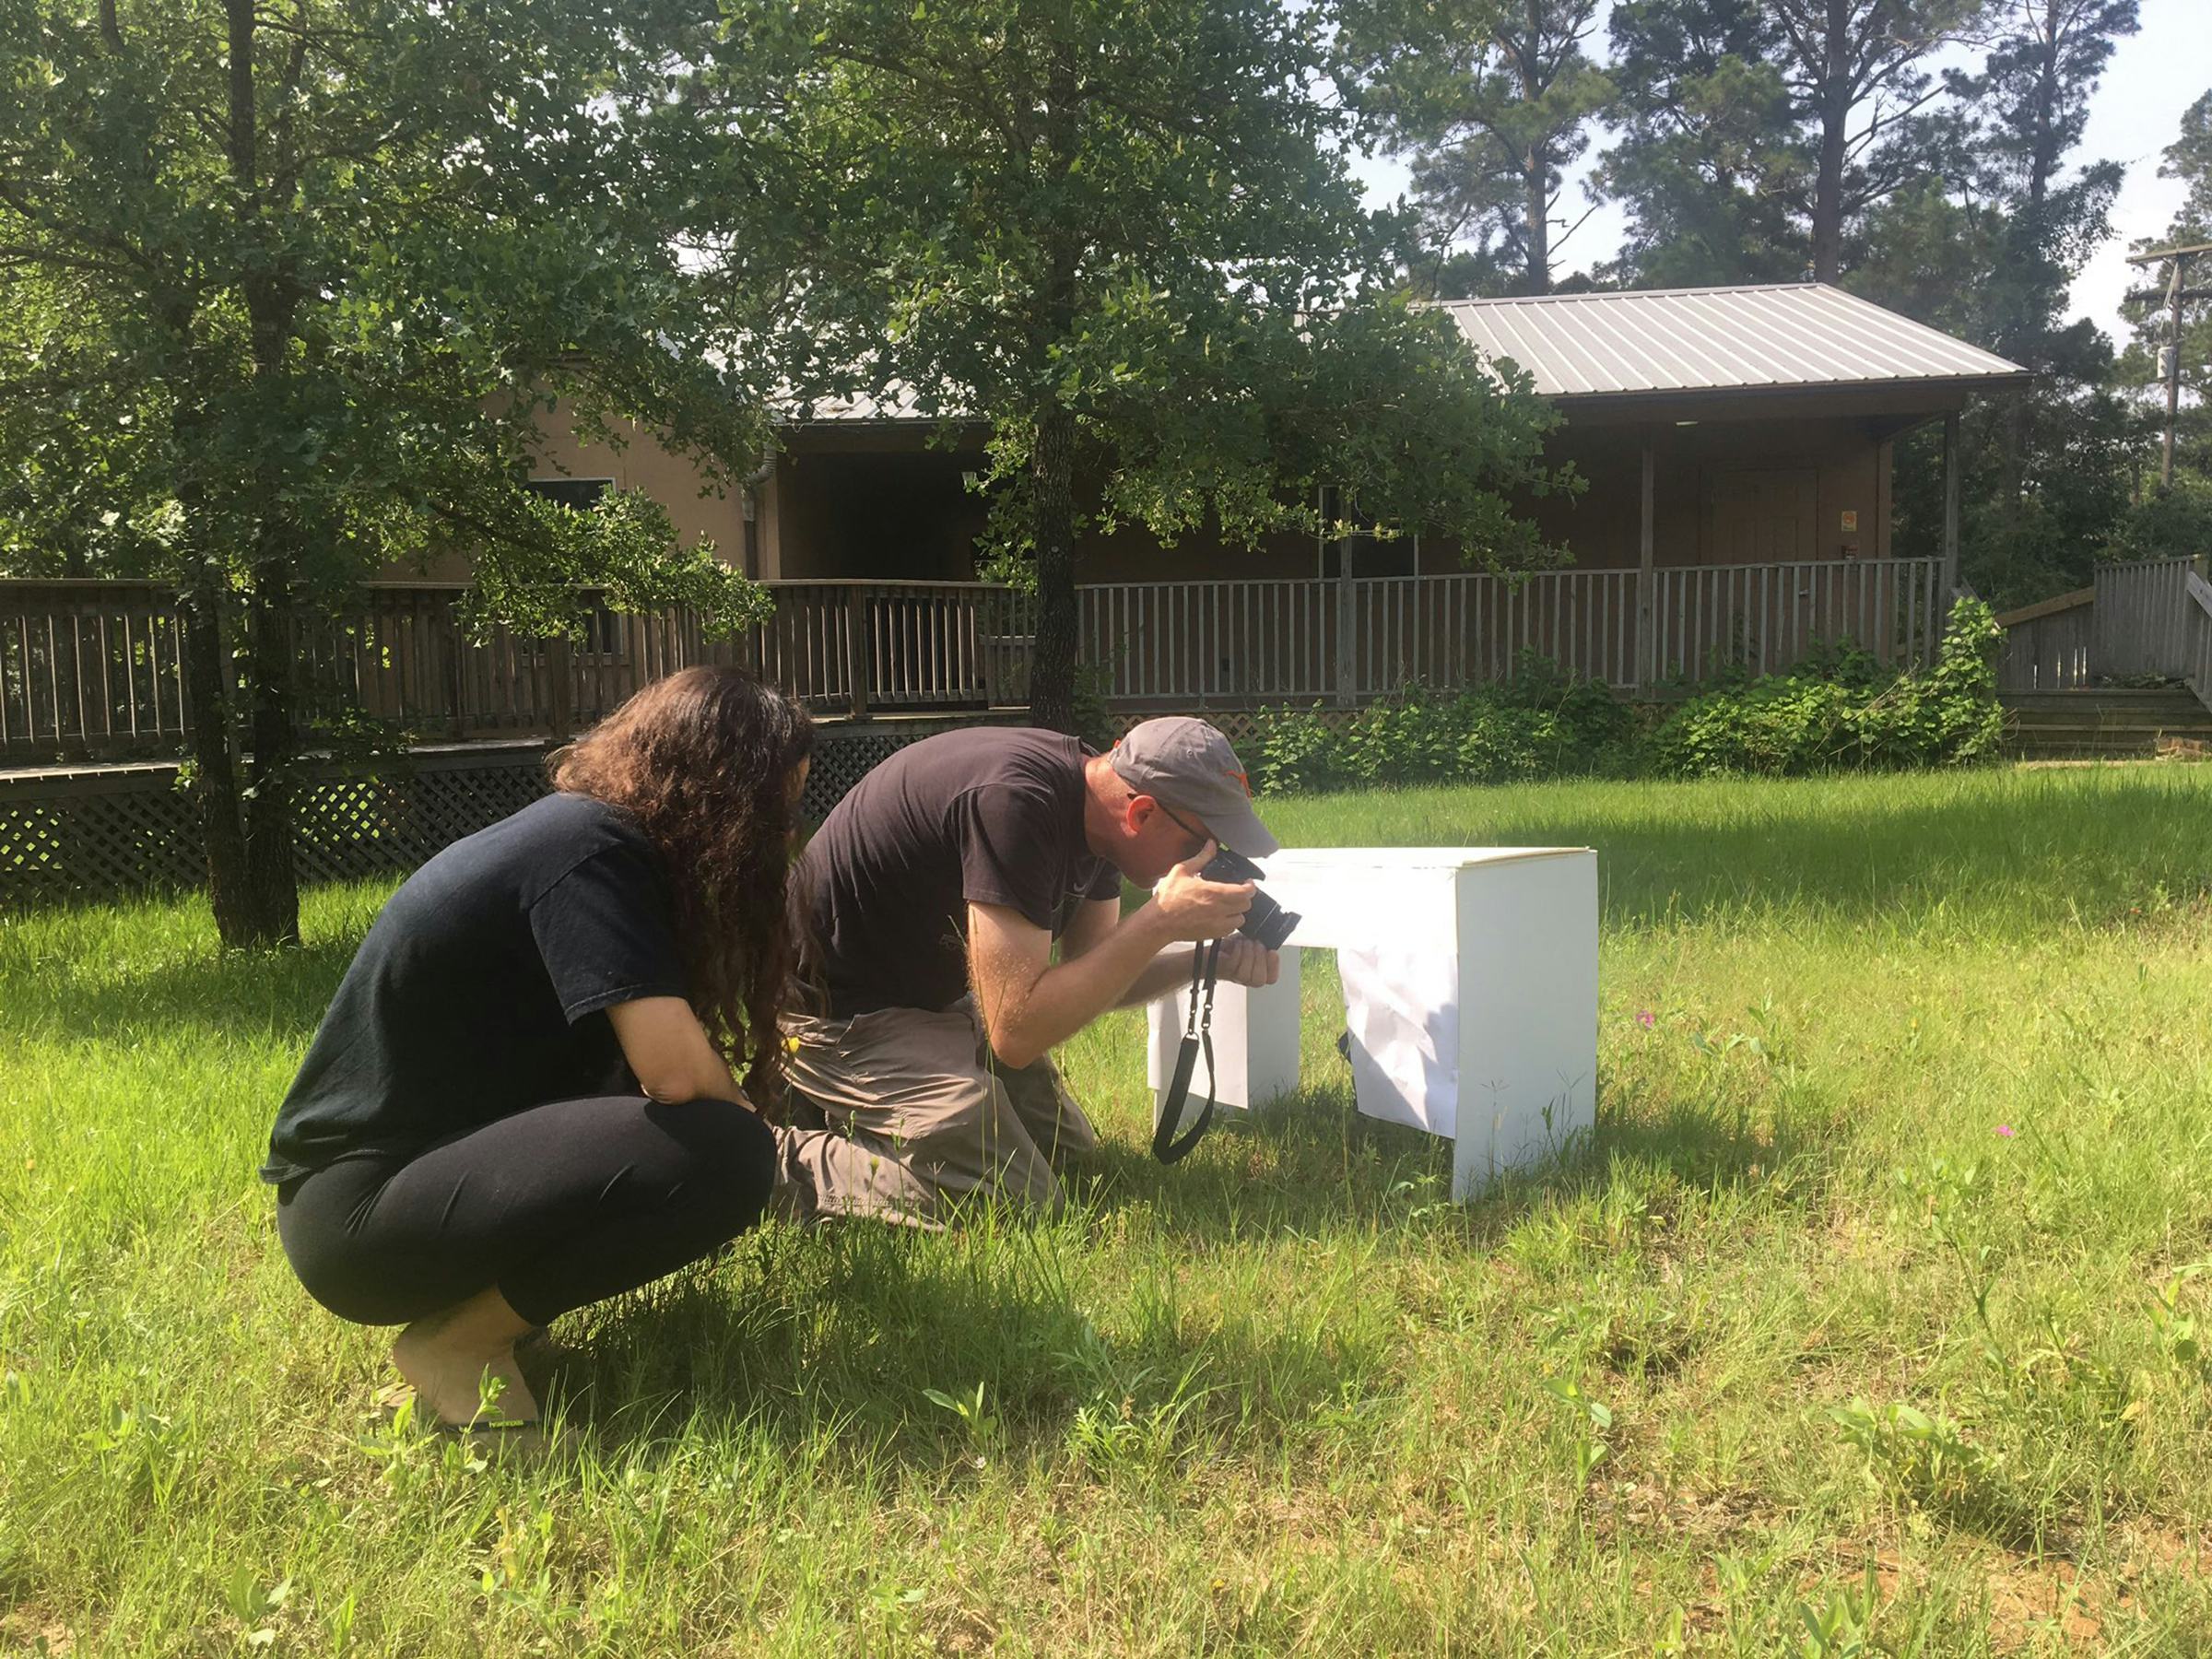 Photos of students conducting research in a grassy field outside a station at Stengl Lost Pines Biological Research Station